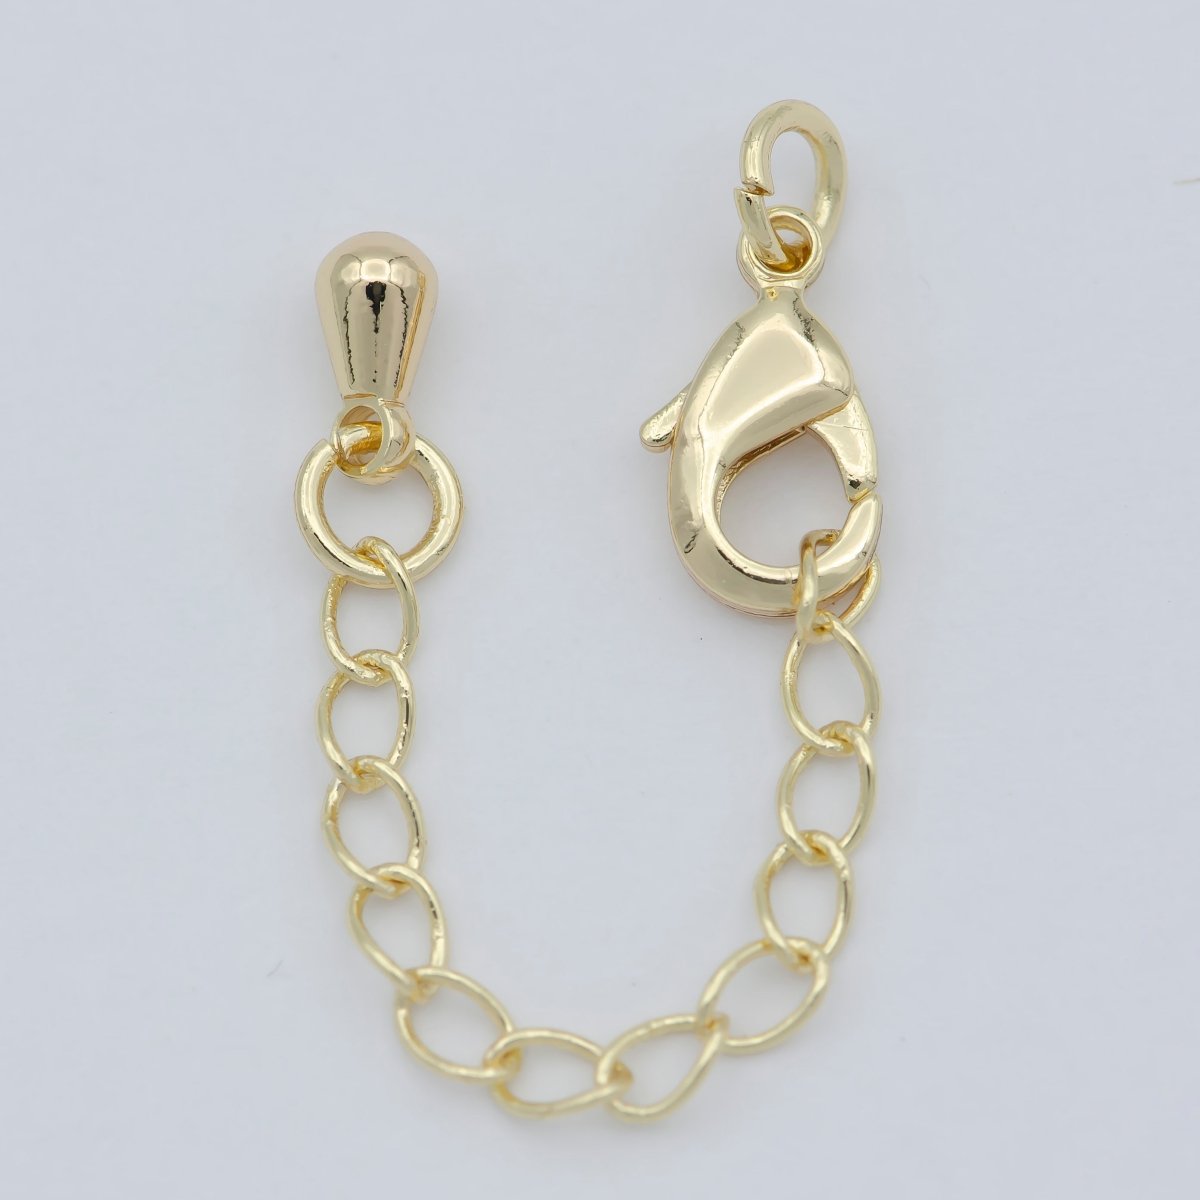 Gold Filled Chain Extender For Necklace Bracelet Supply Component Findings Extenders Lobster Claw Clasps With Silver Extender Chain L-465 L-466 - DLUXCA